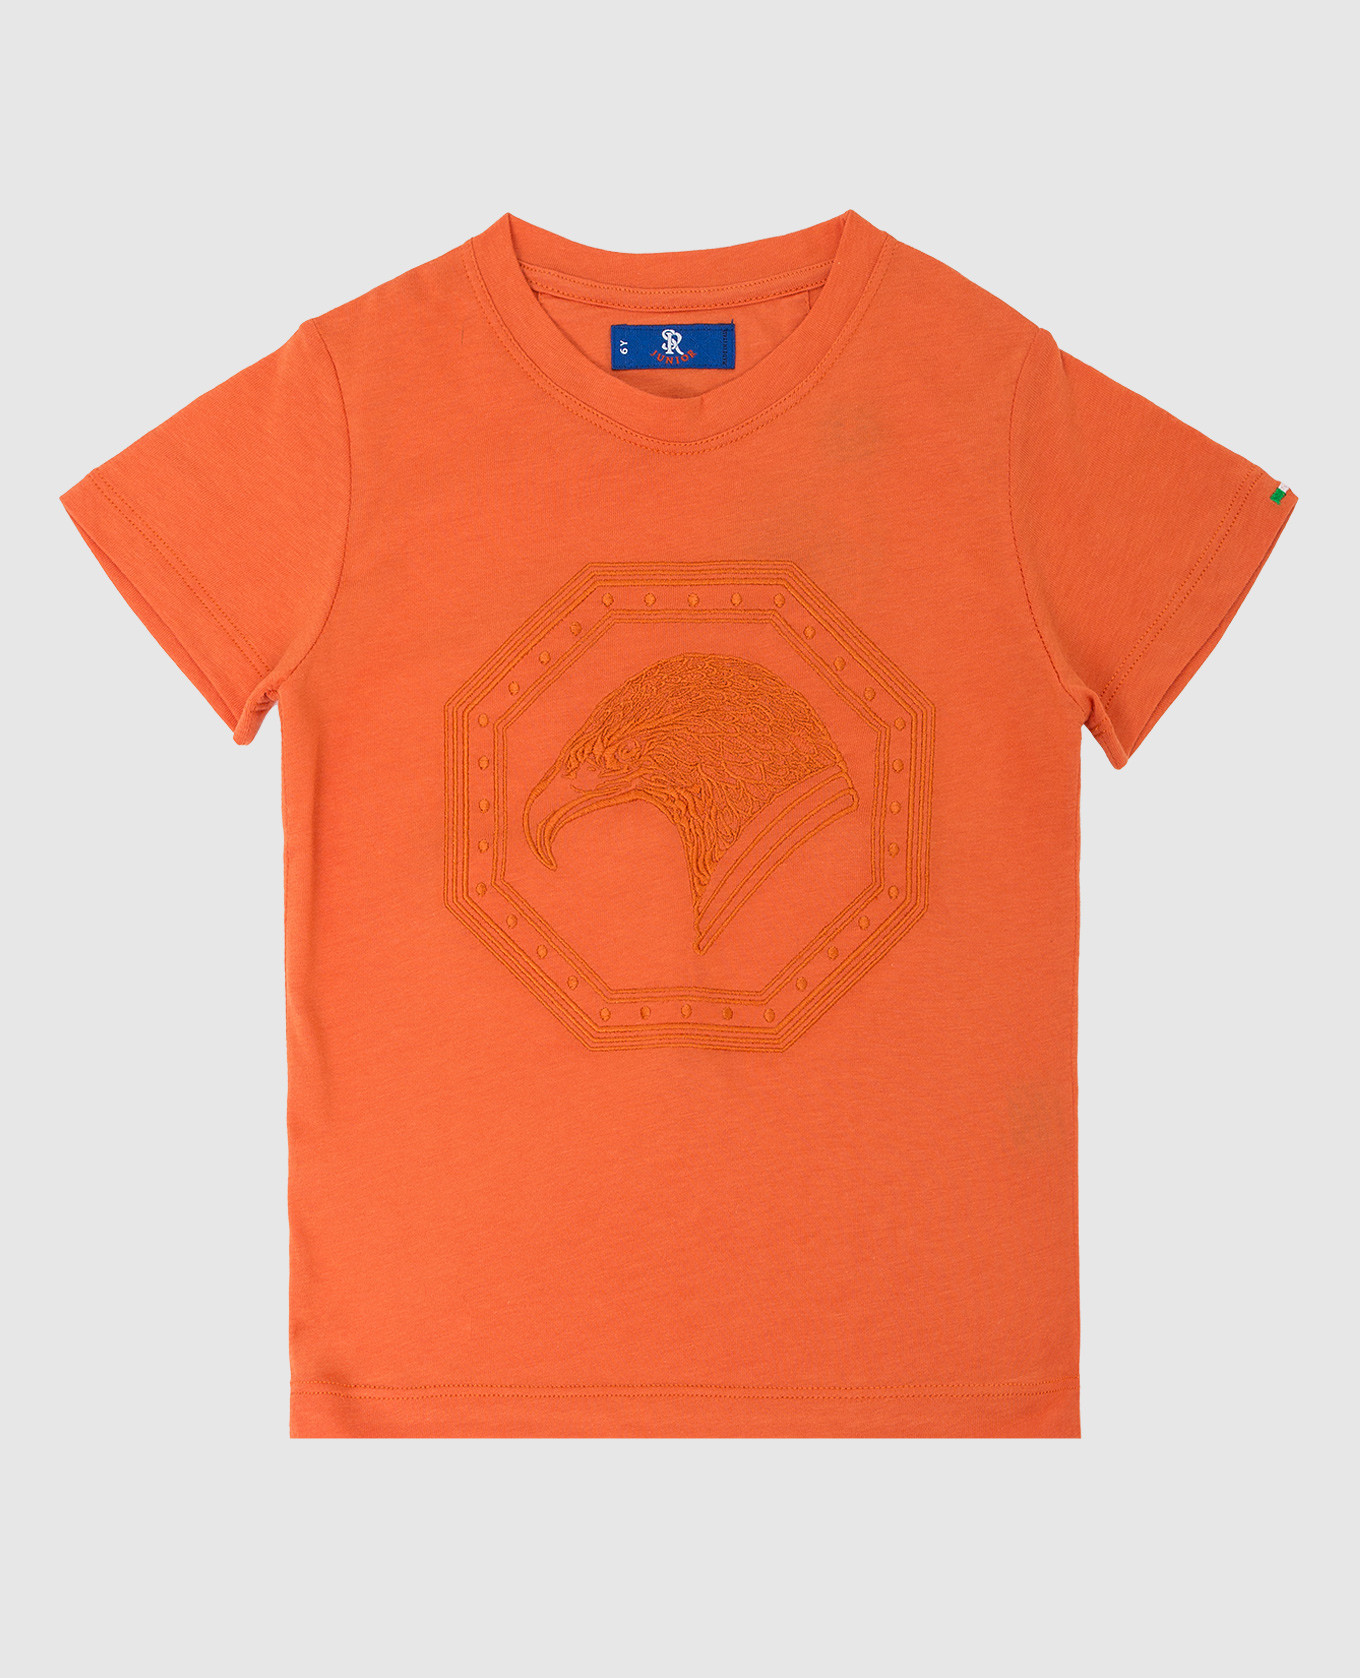 Children's orange t-shirt with embroidery